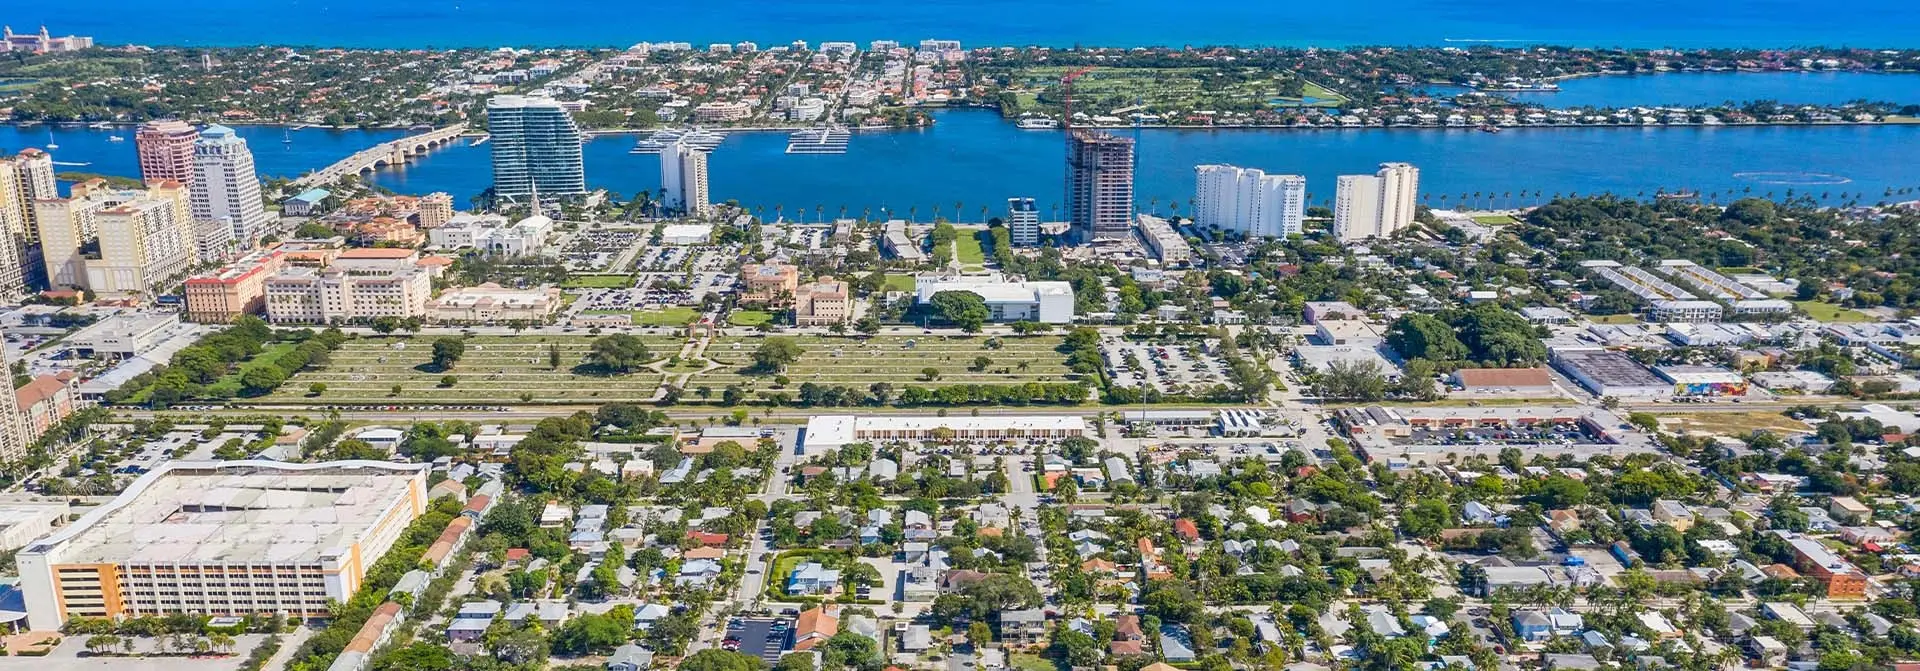 Grandview Heights Homes for Sale | Grandview Heights West Palm Beach Homes for Sale 